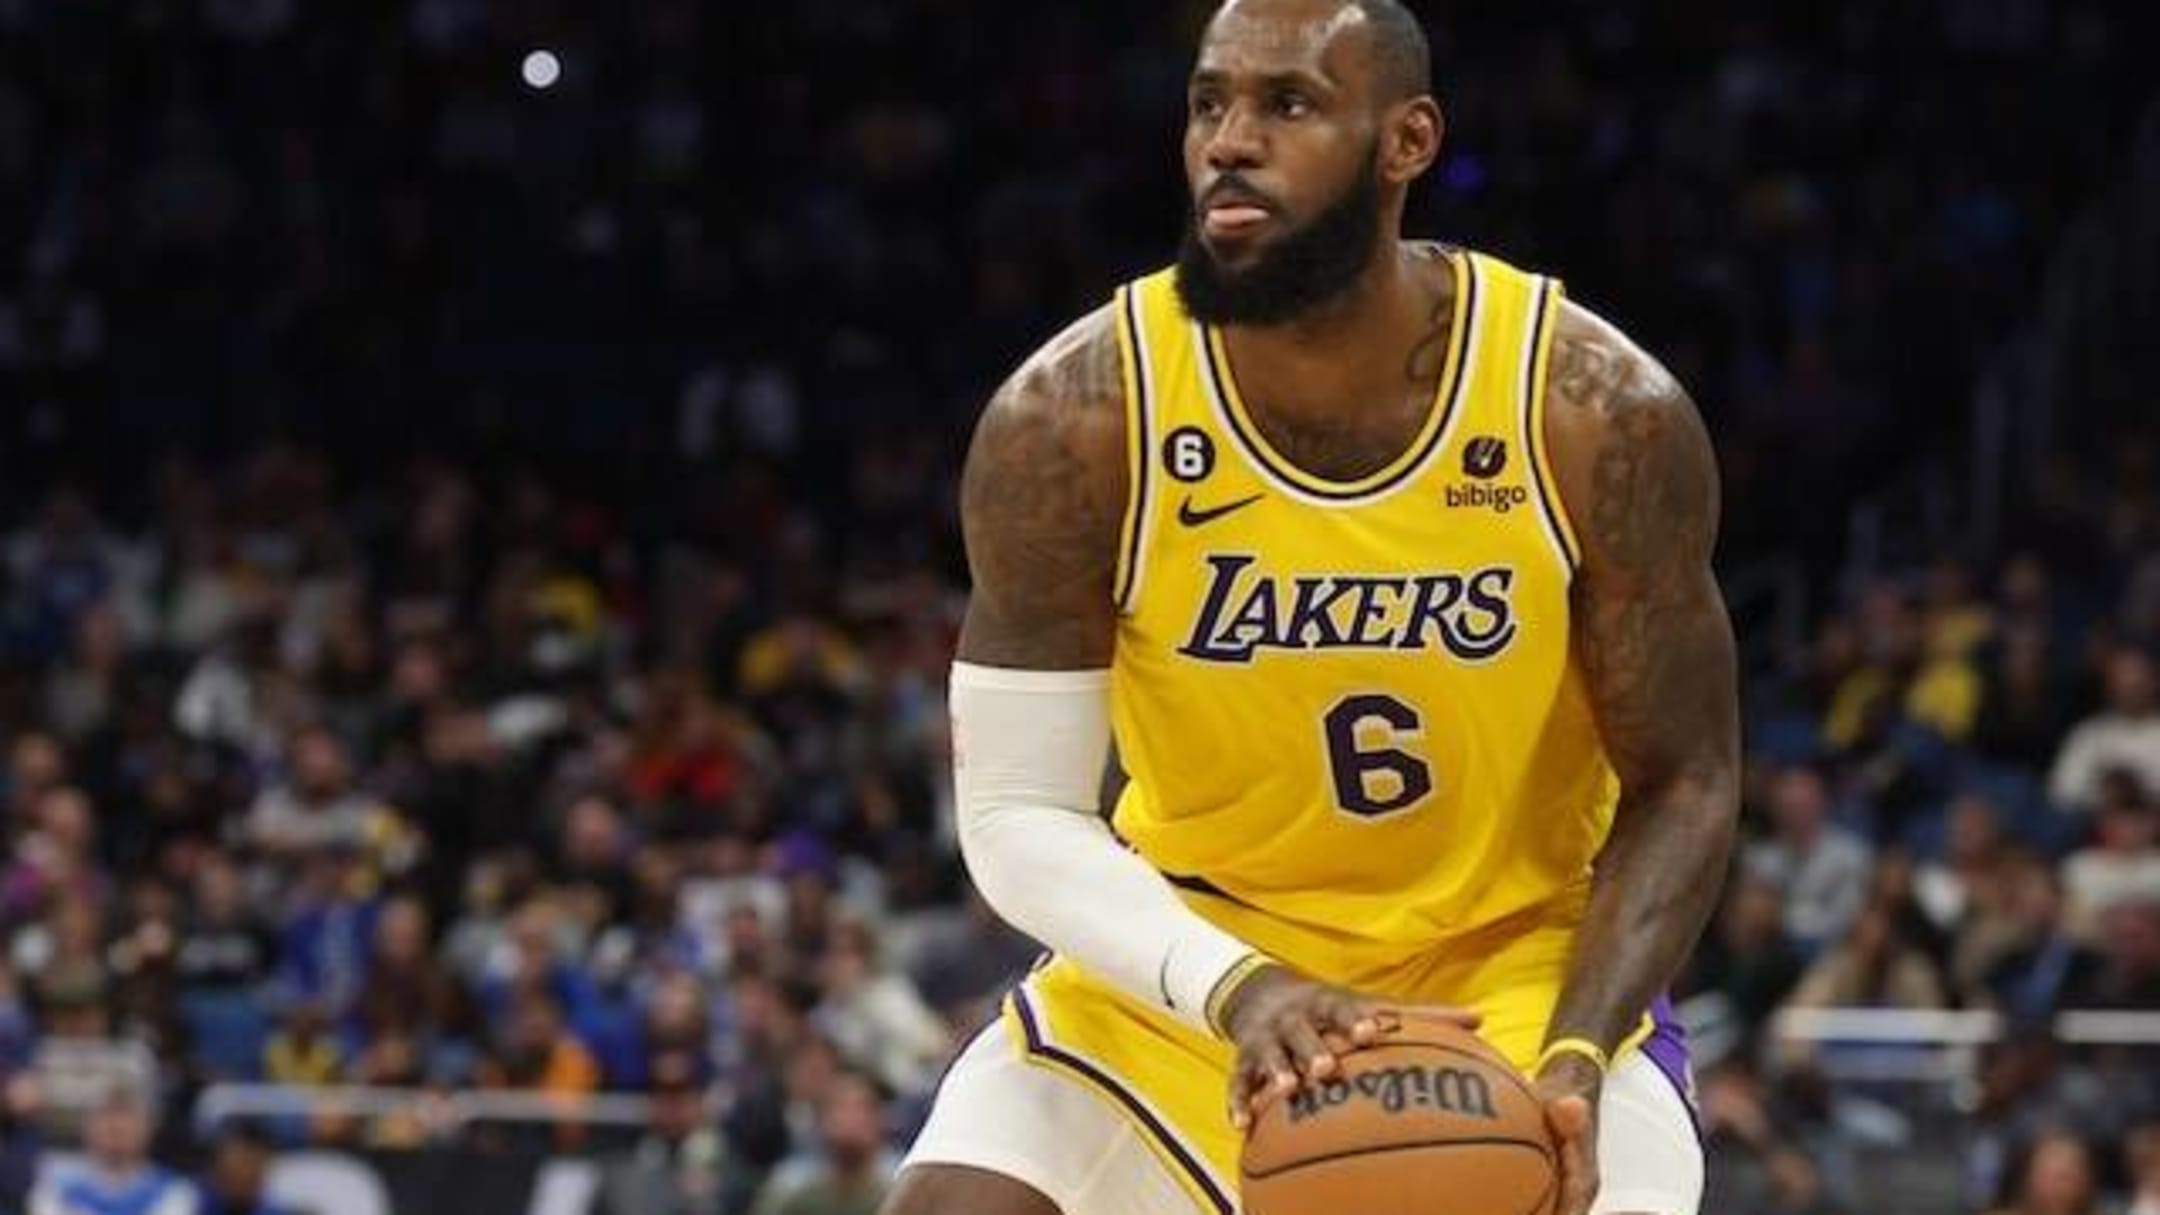 NBA Twitter erupts after Pacers rookie sends LeBron James, Lakers